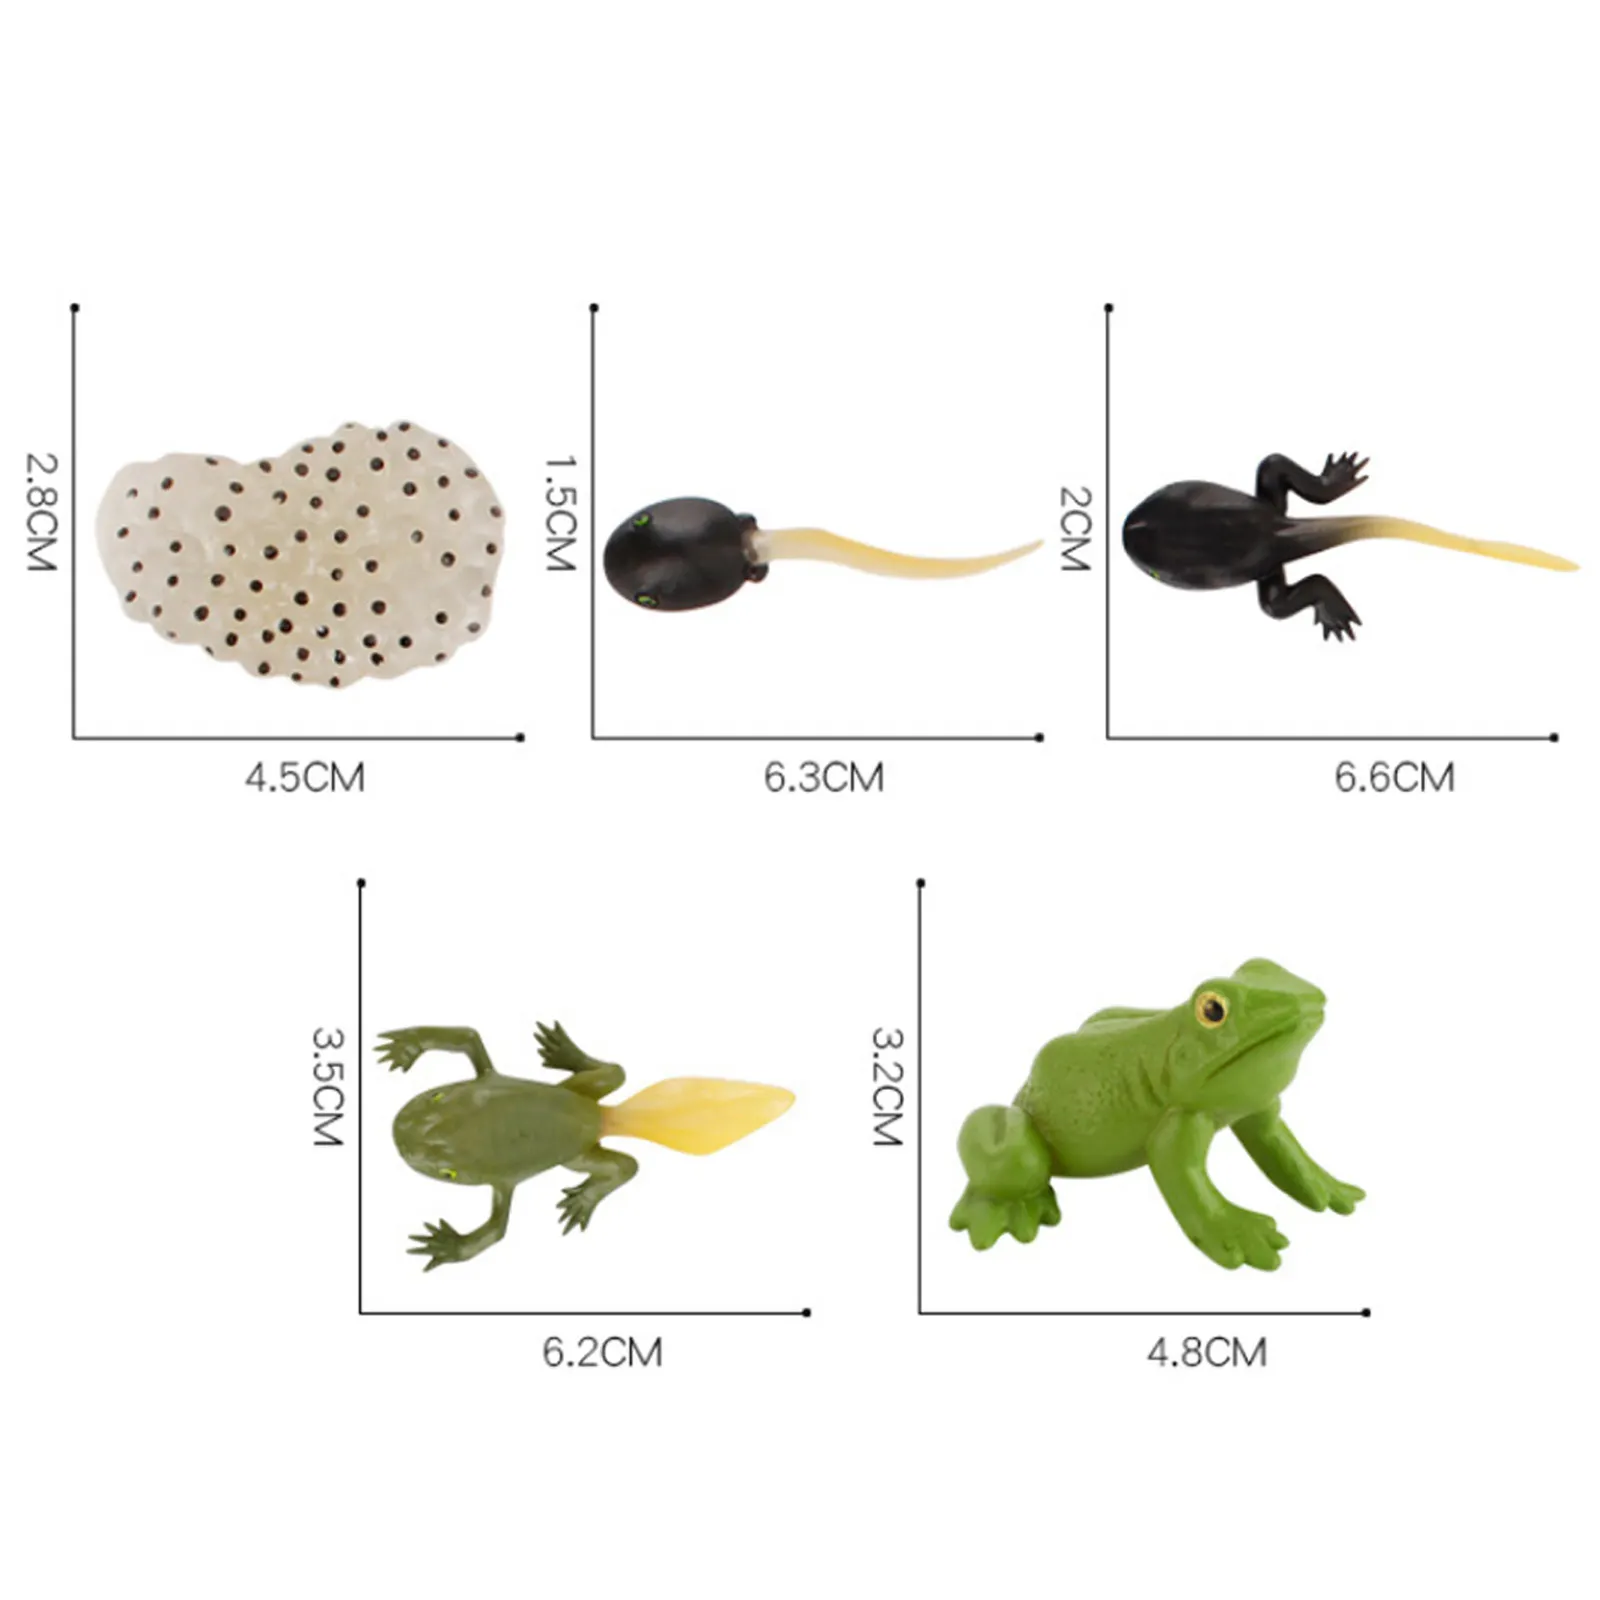 Frog grenouille croissance Life Cycle Figure insectes simulation enfants Education Model Toy 